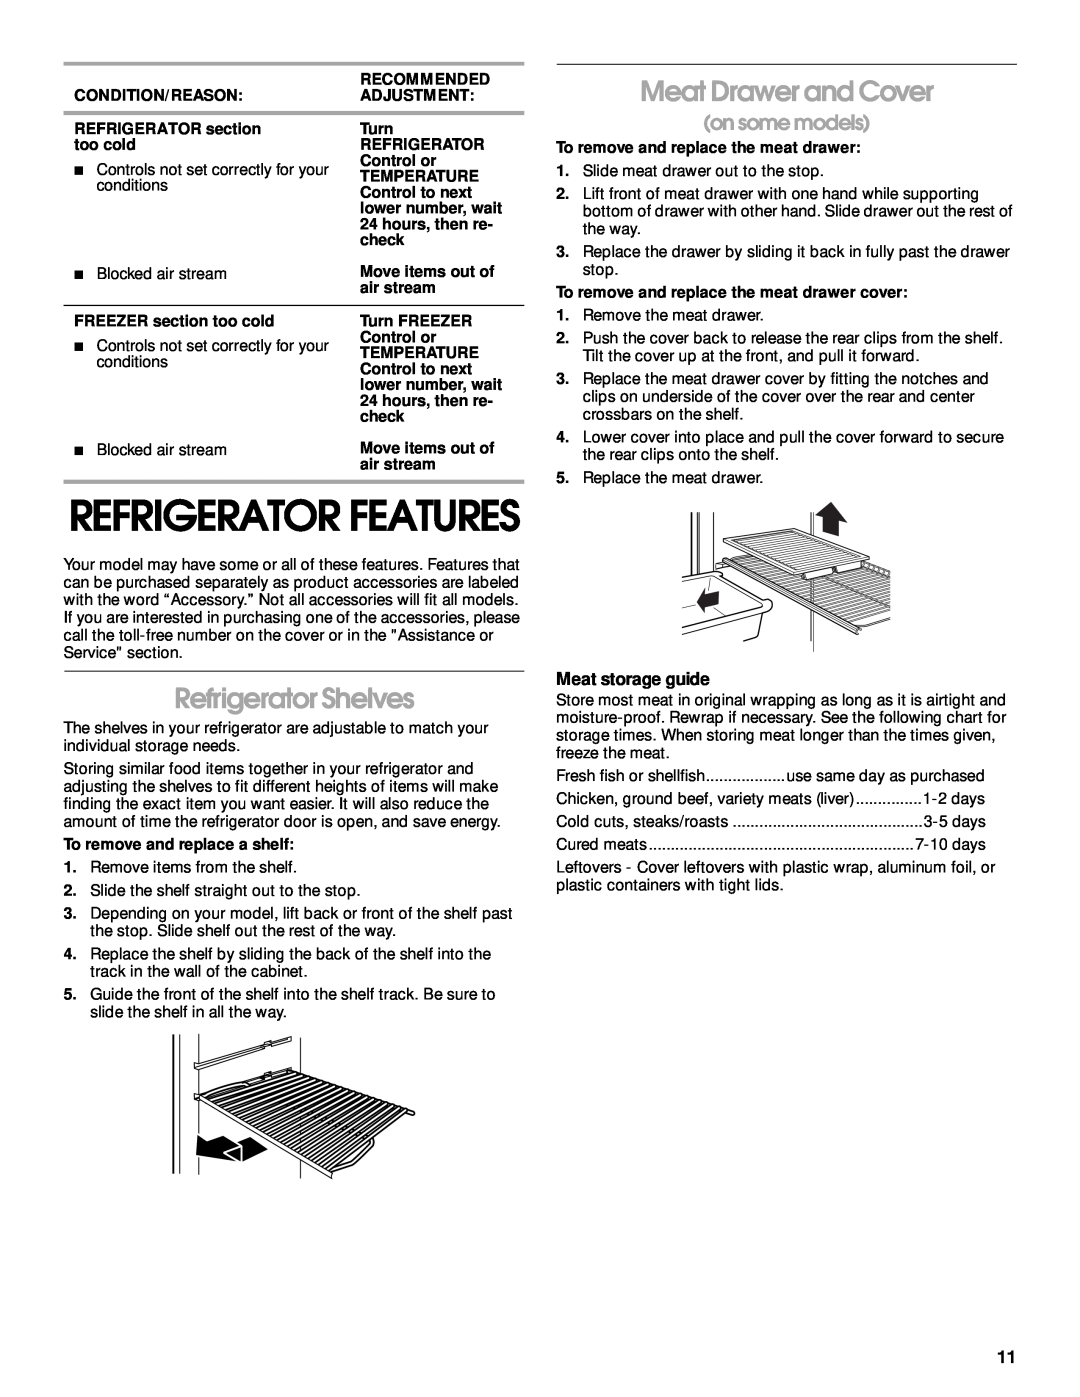 Whirlpool ST14CKXHW00 Refrigerator Shelves, Meat Drawer and Cover, on some models, Refrigerator Features, Recommended 